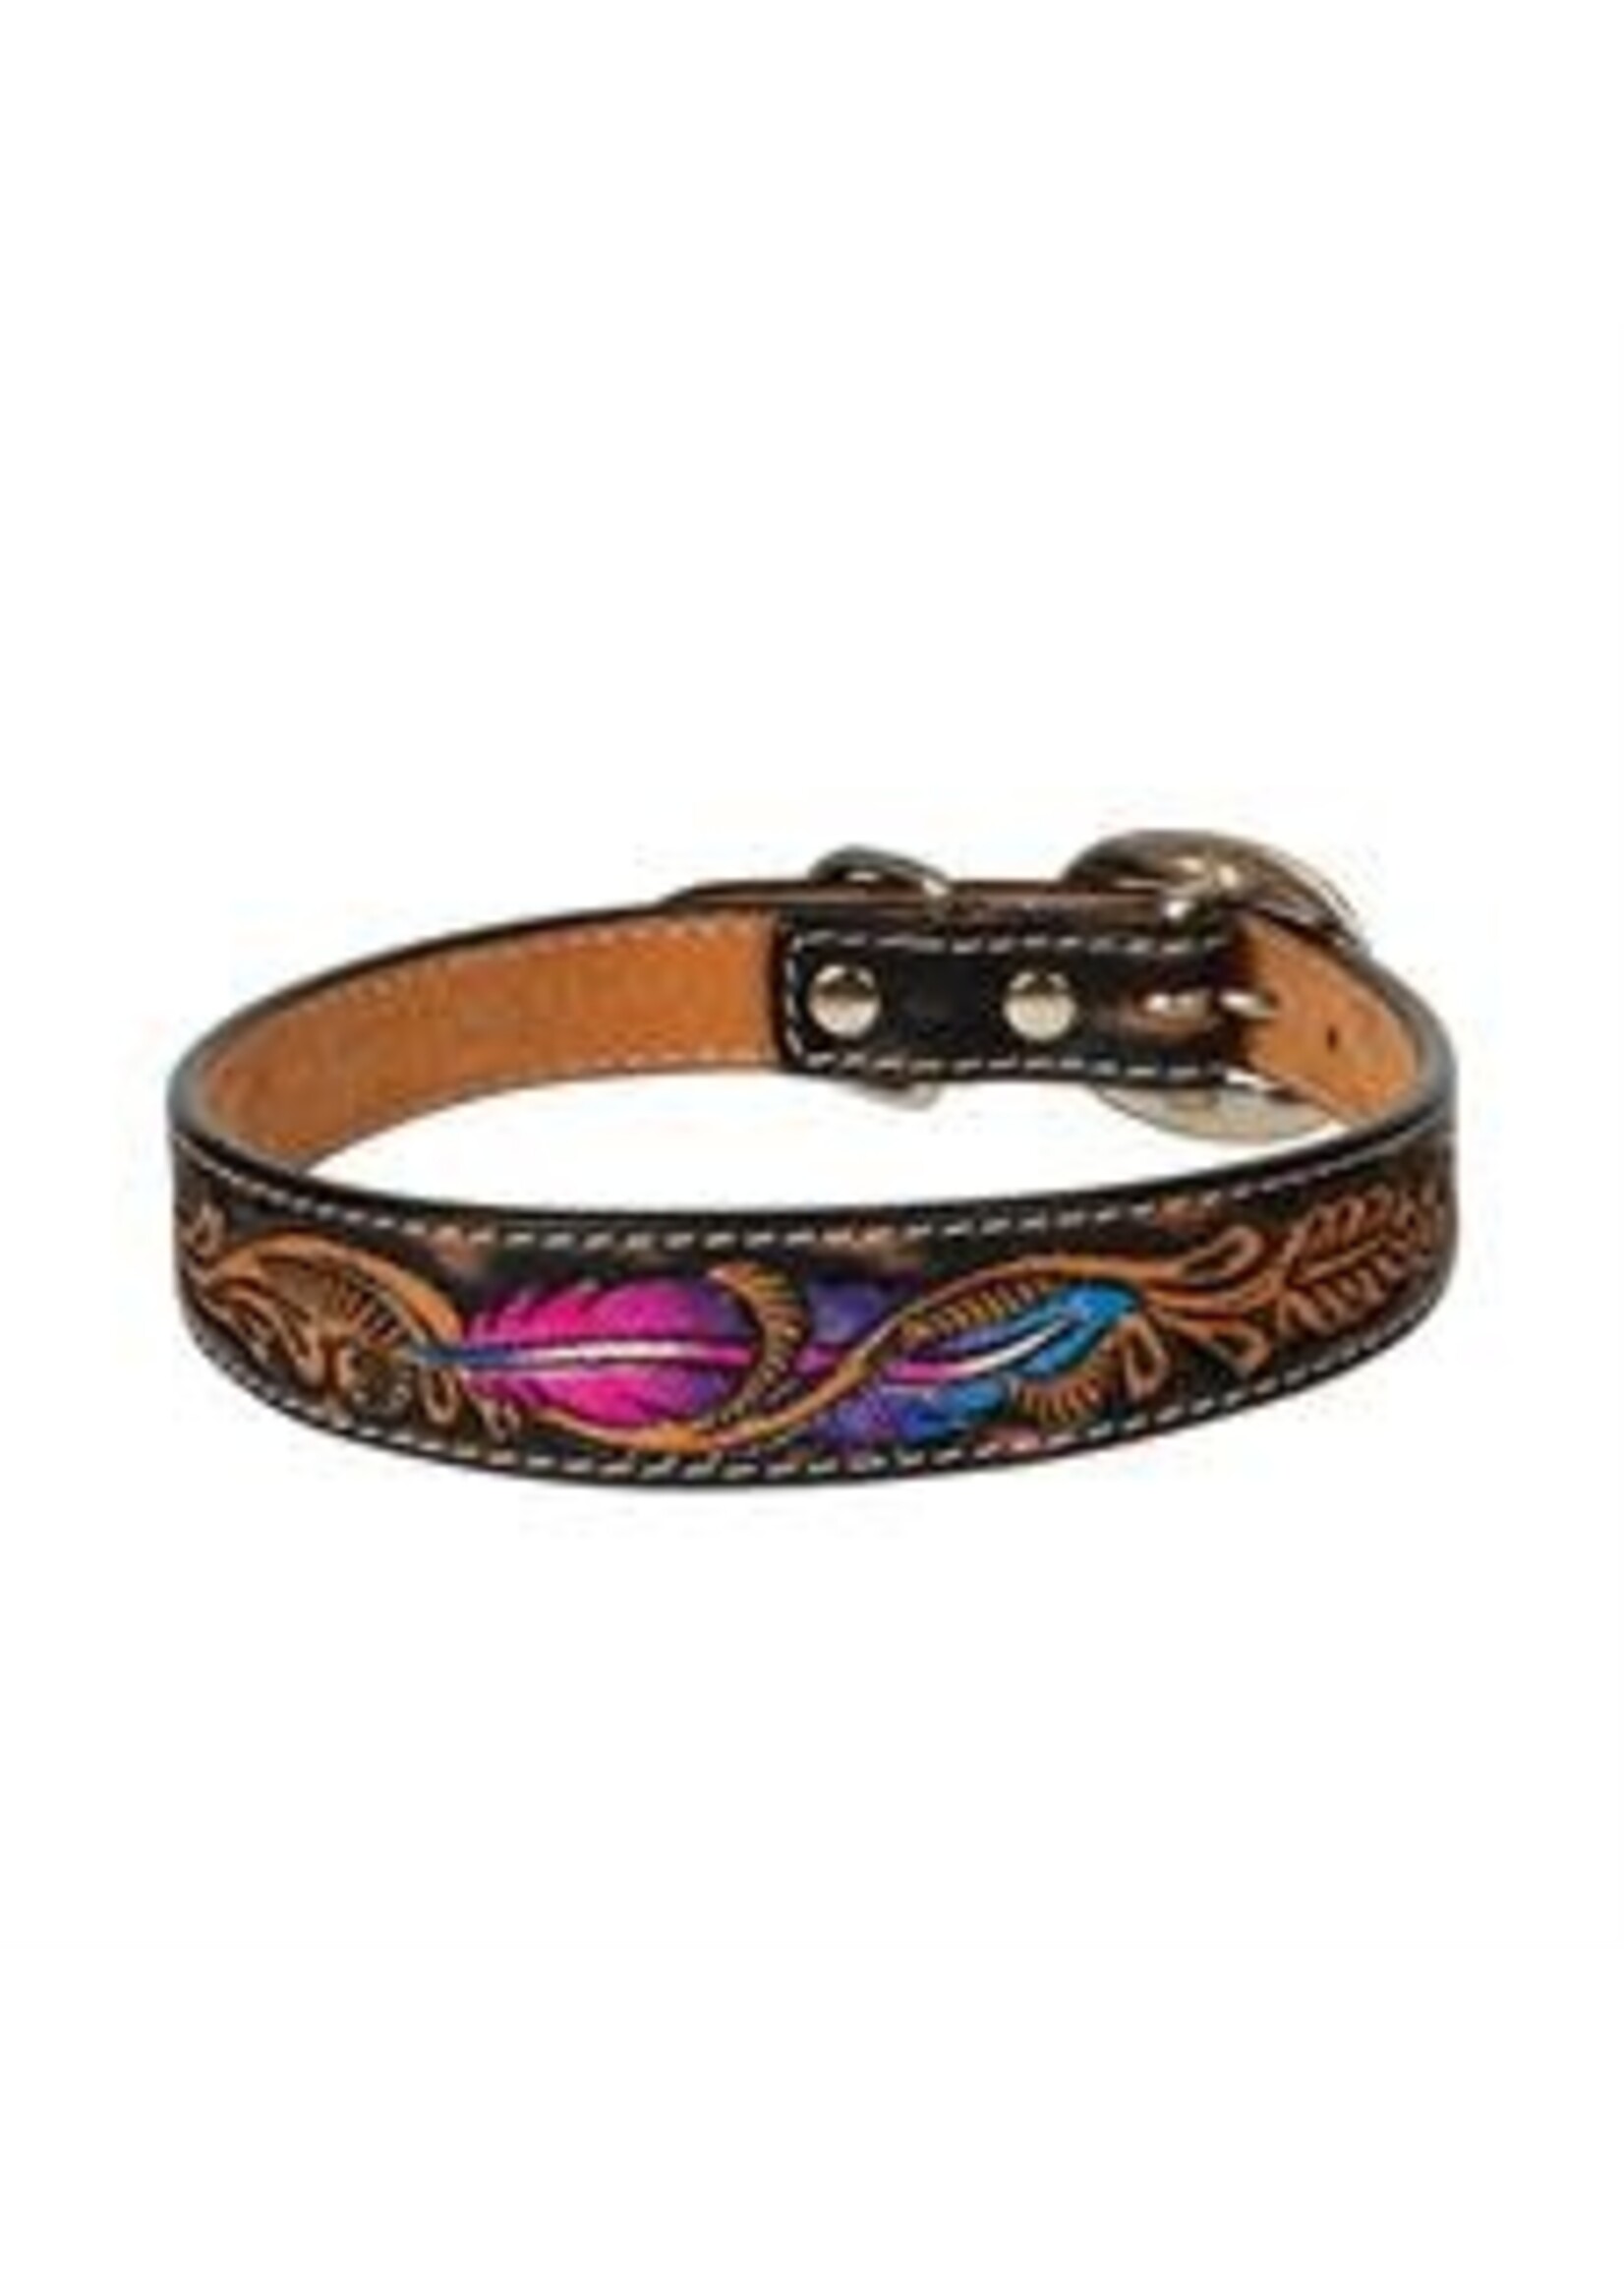 Weaver Pet Weaver's Twisted Feather Leather Dog Collar 3/4" x